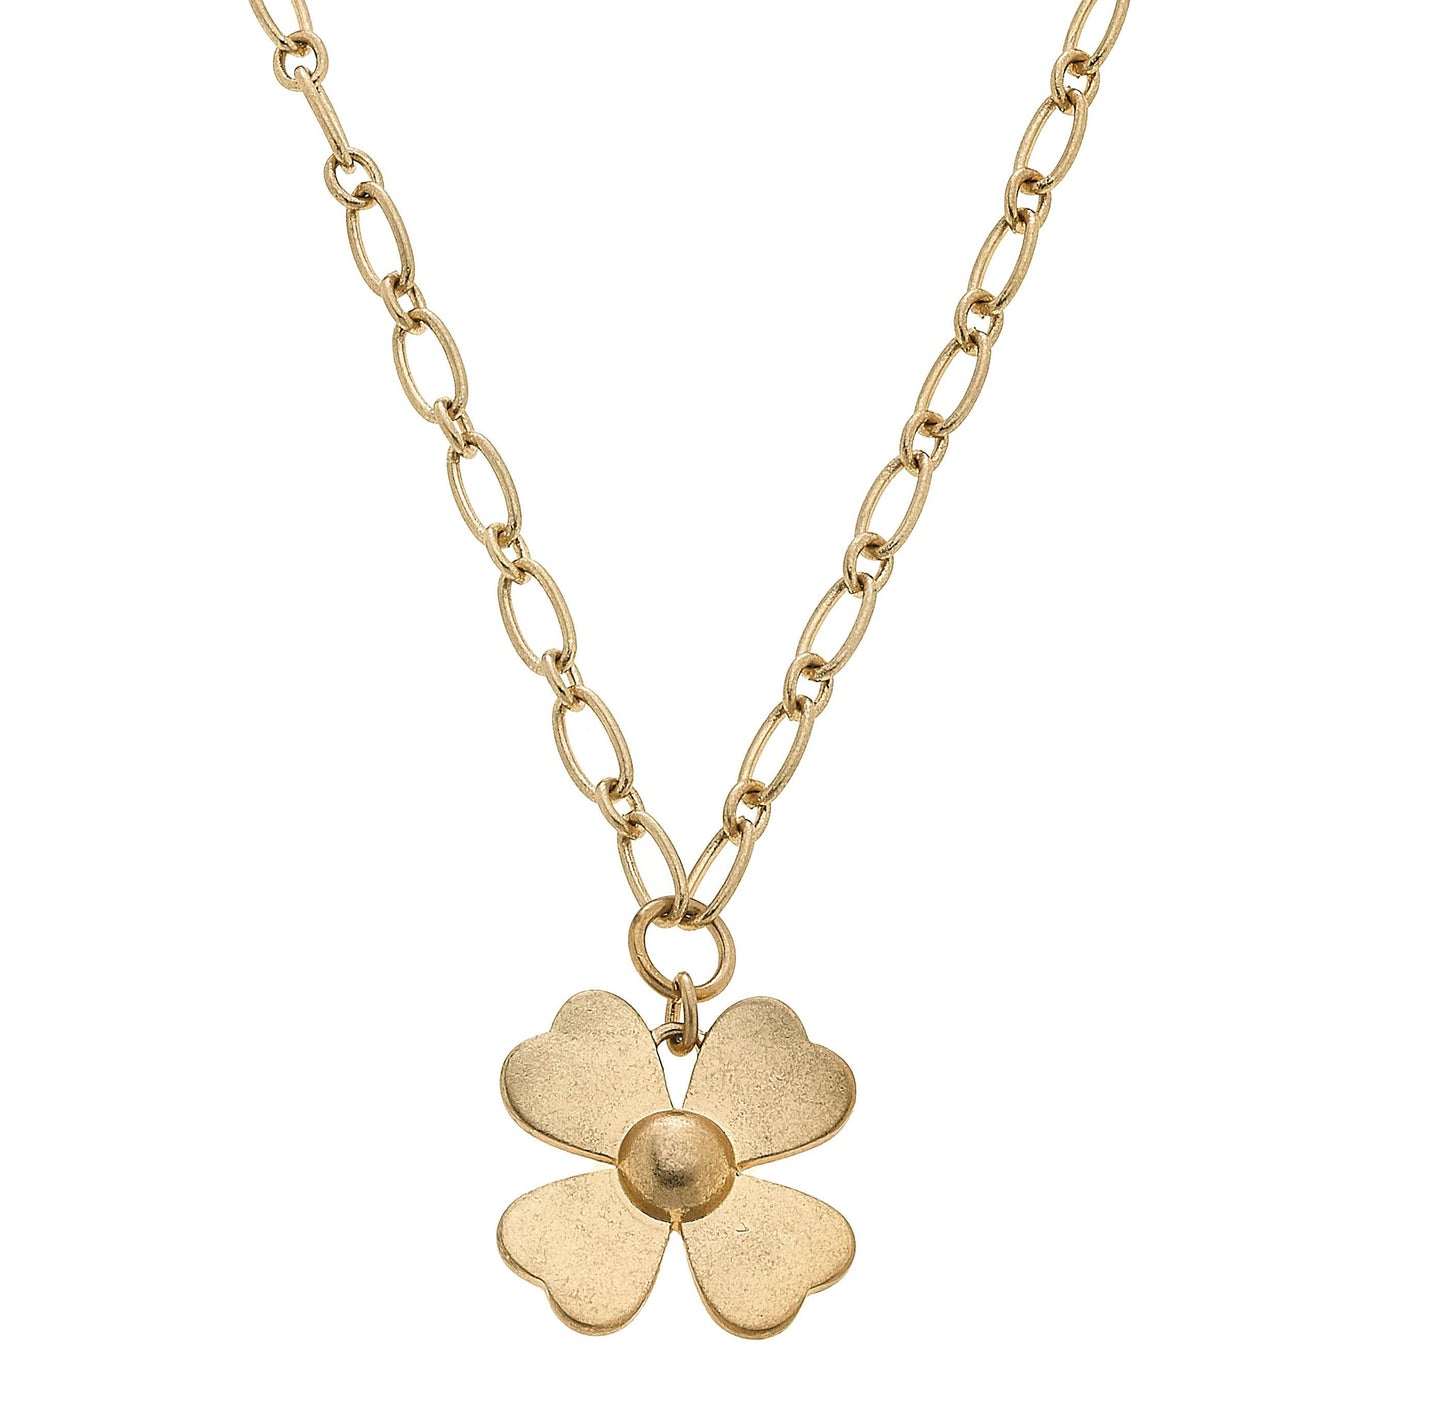 Ainsley Flower Charm Necklace in Worn Gold